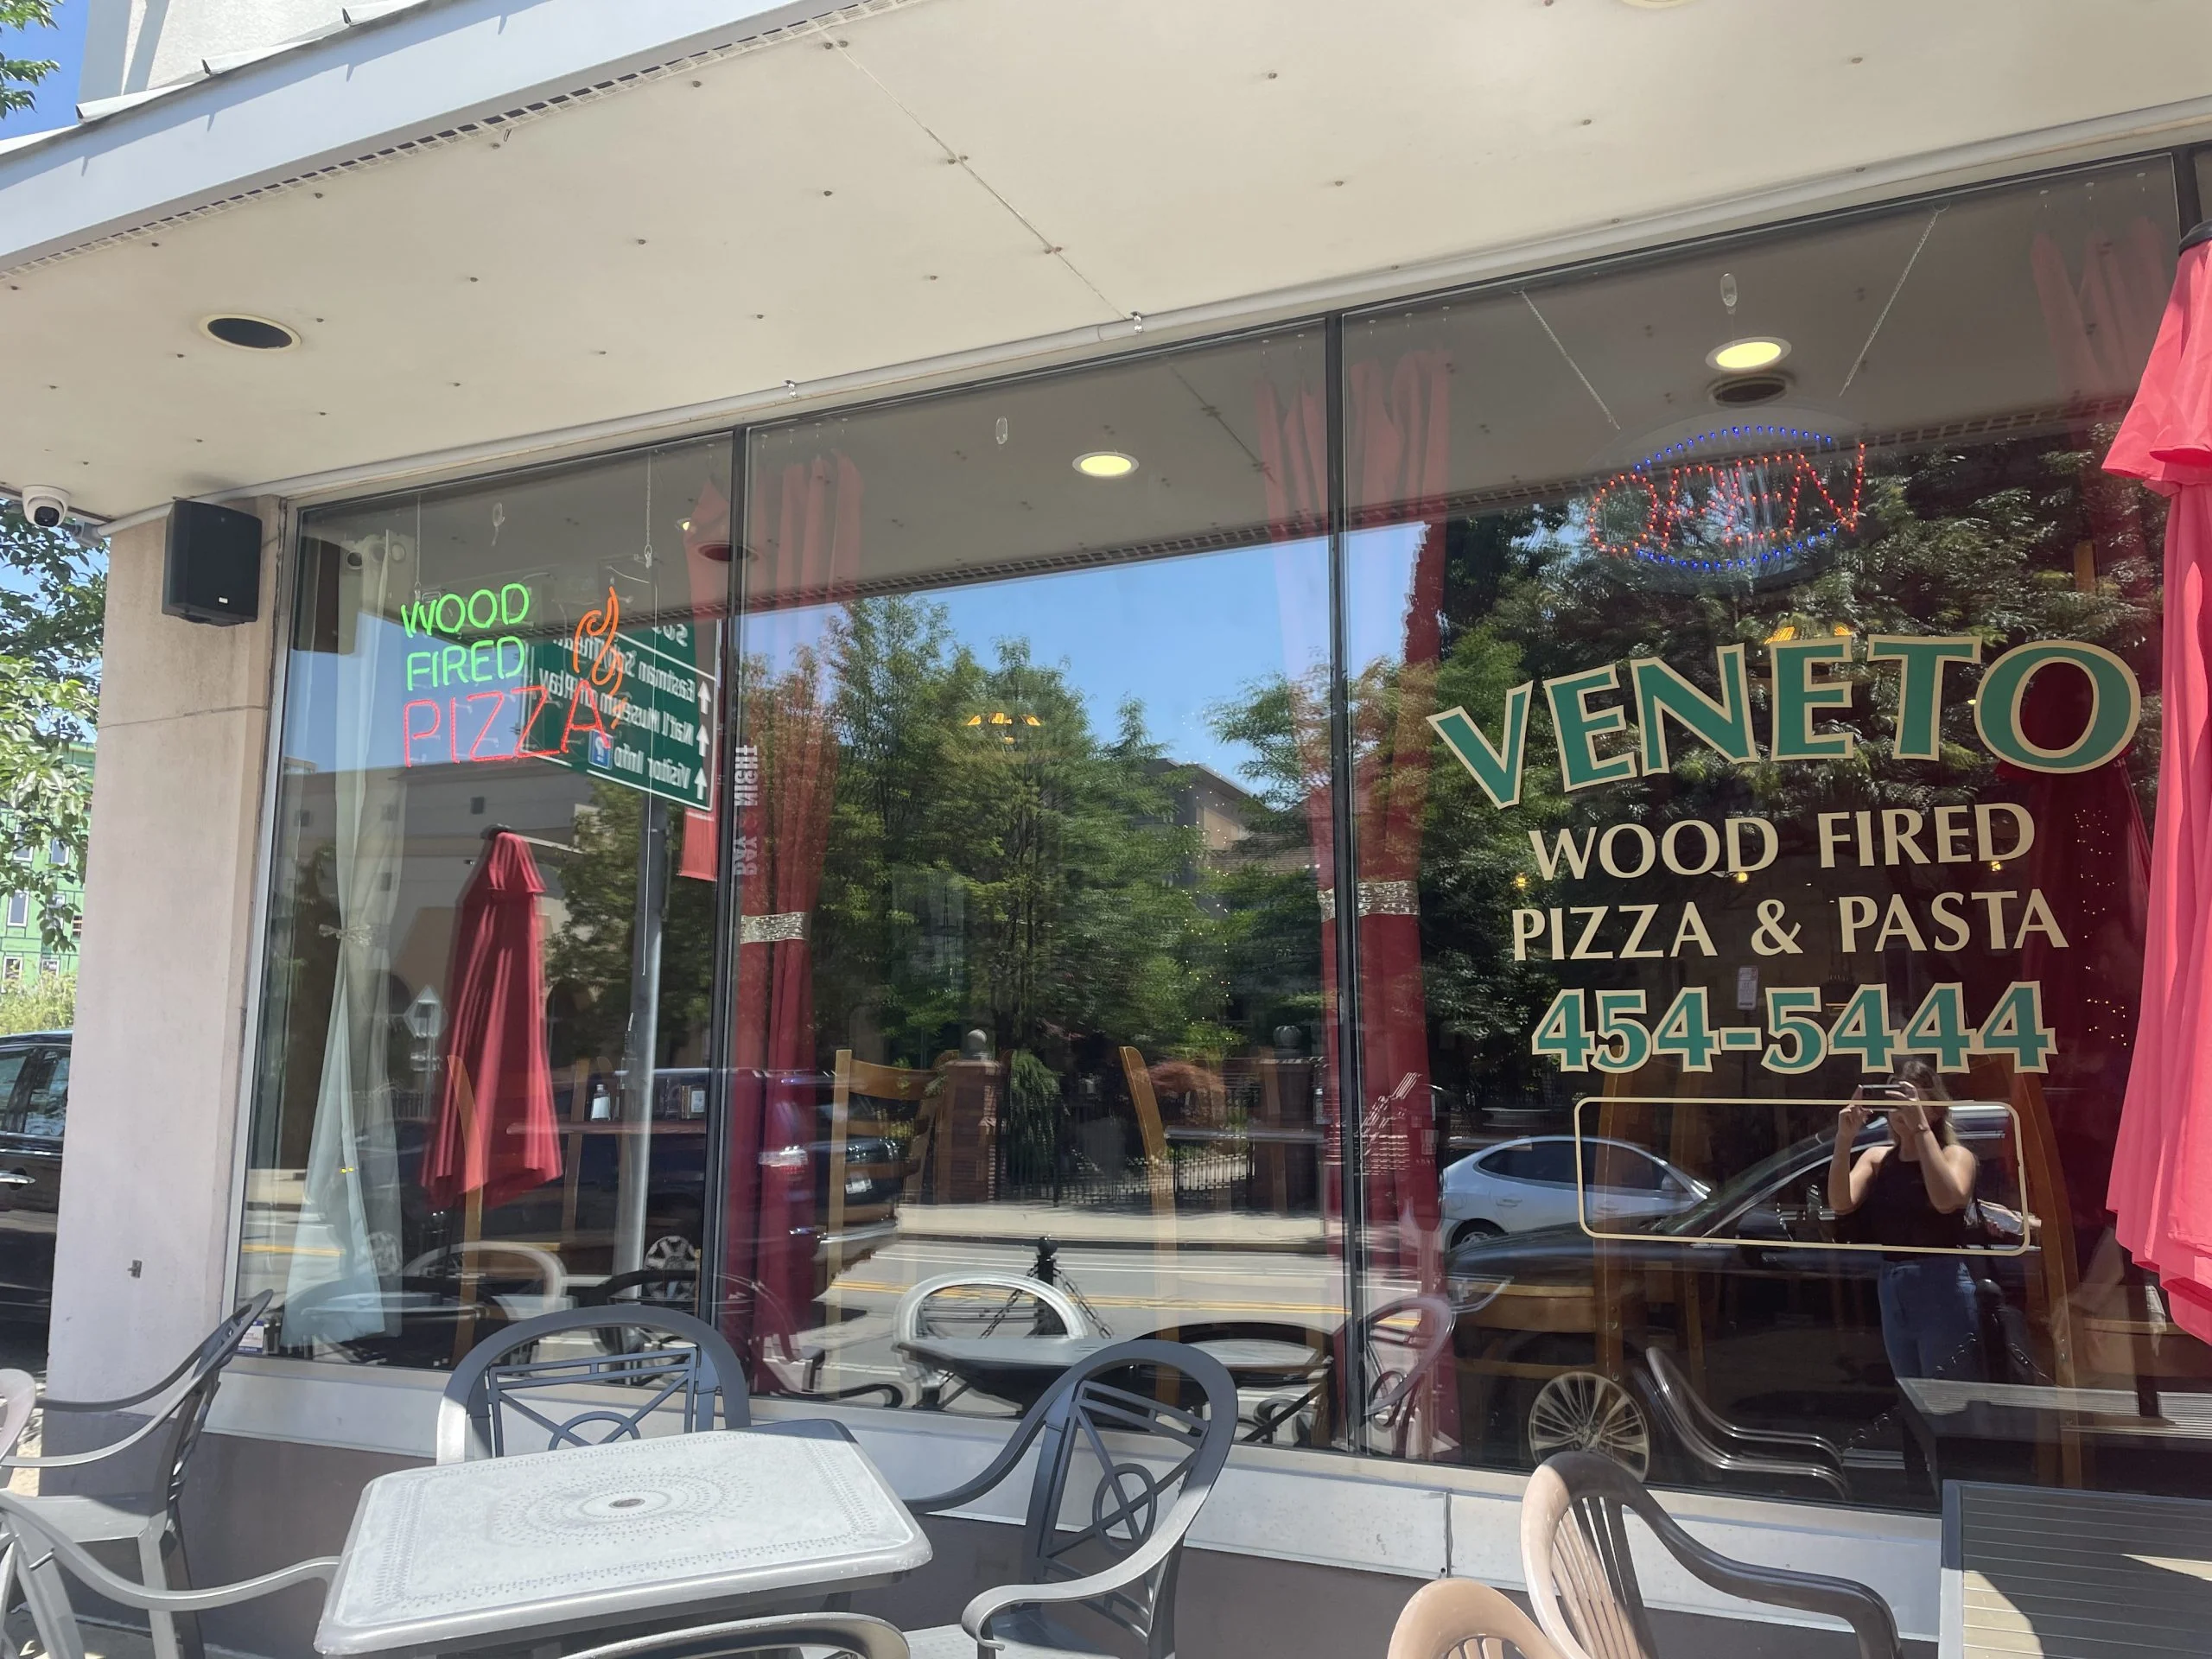 Veneto Wood Fired Pizza and Pasta